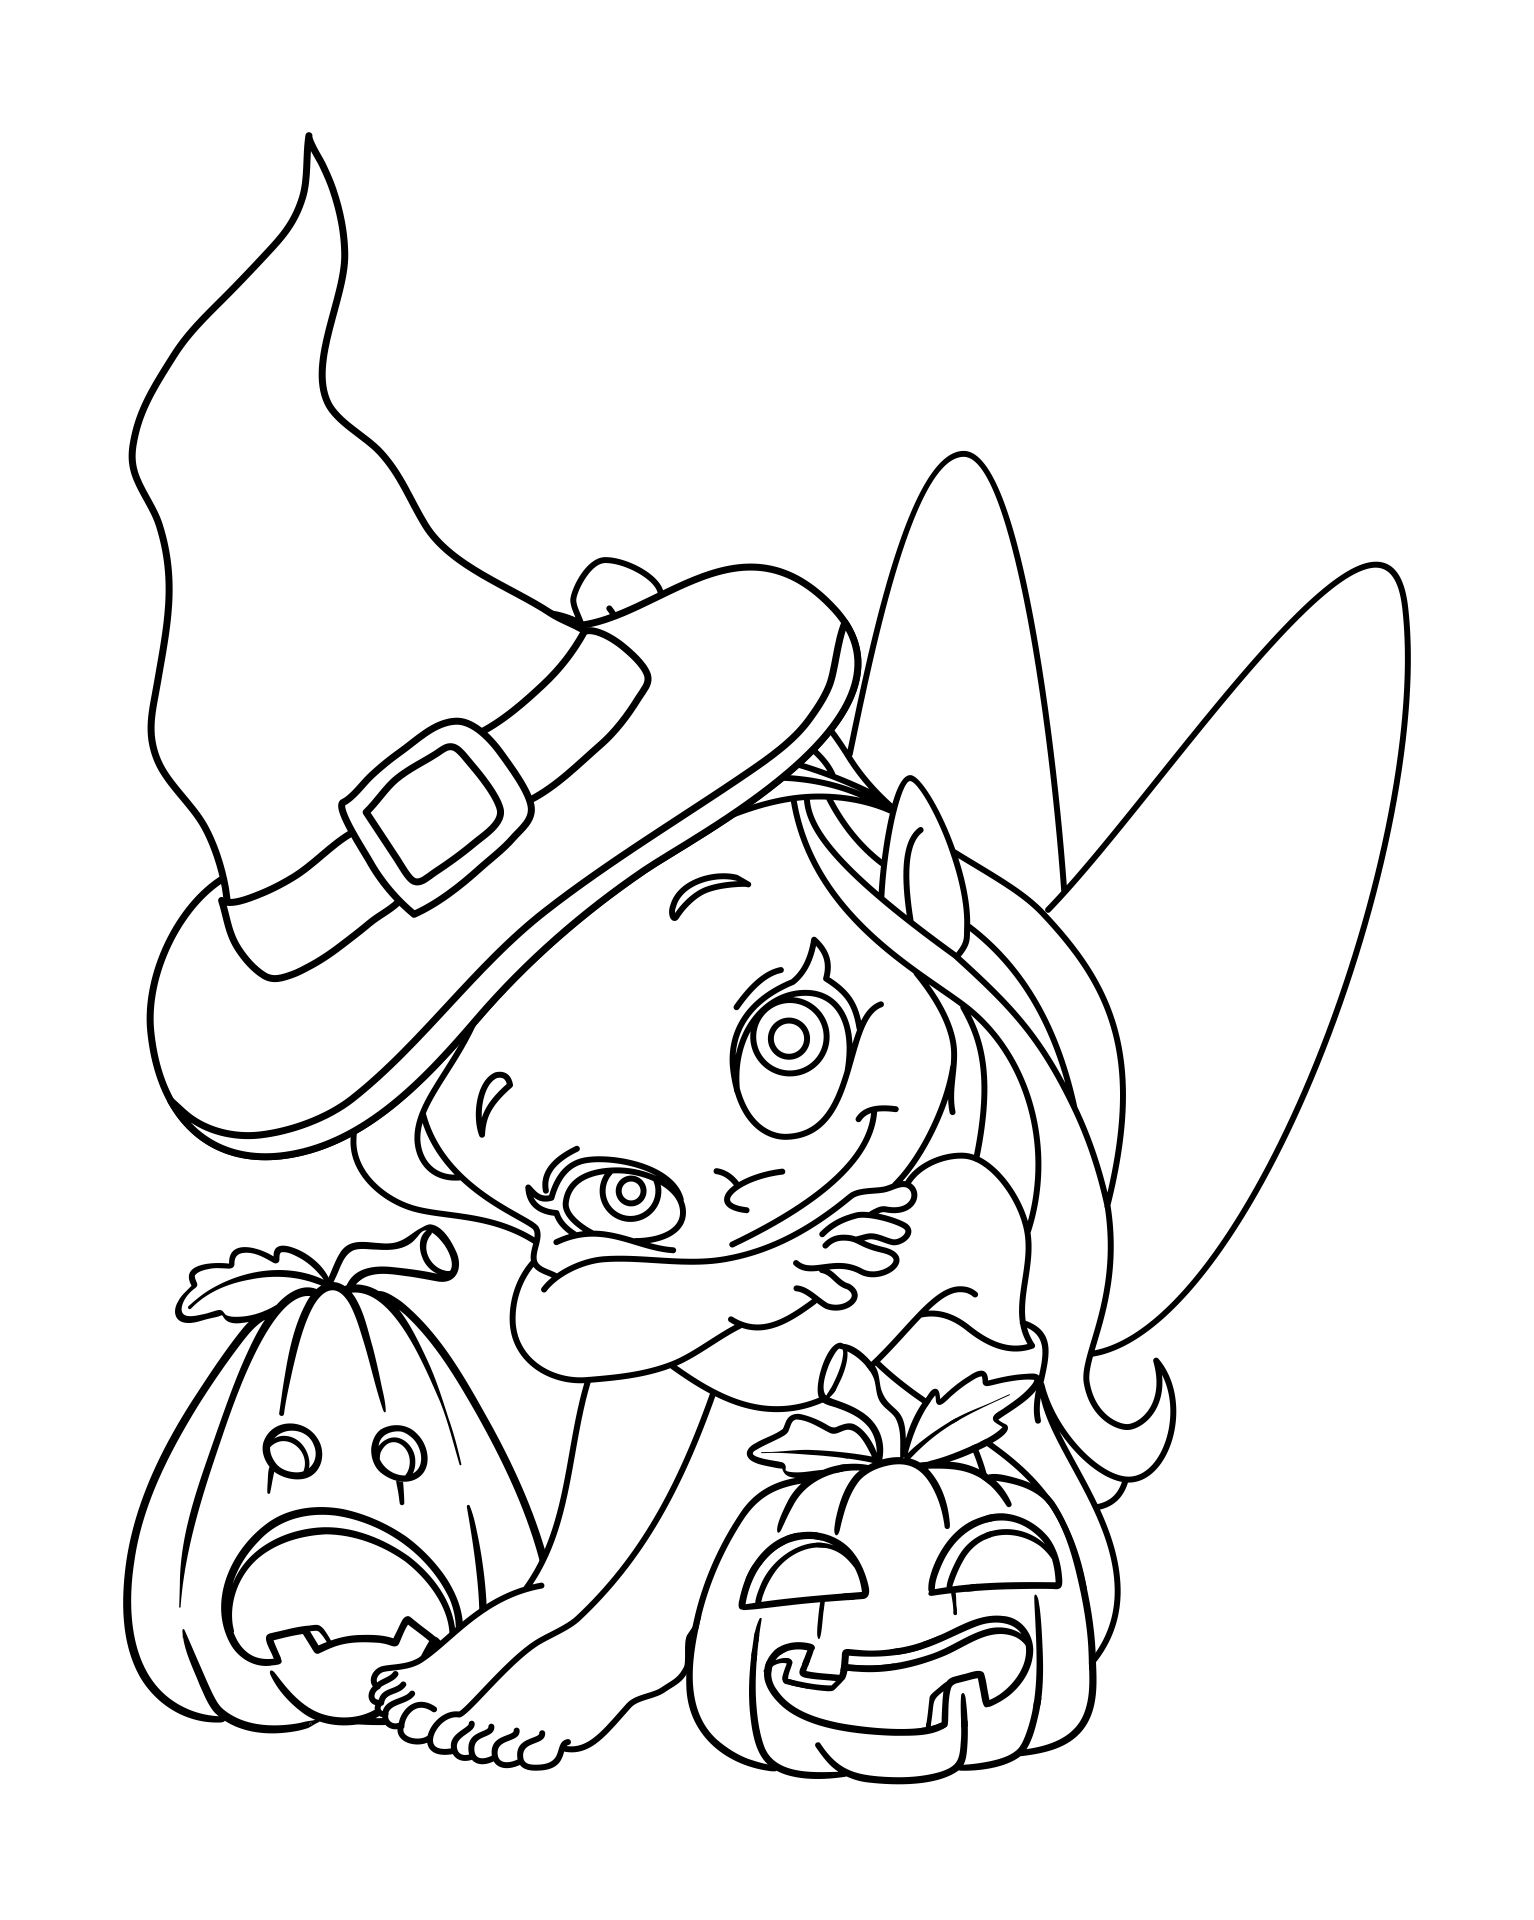 Disney Fairy Halloween Coloring Pages Printable